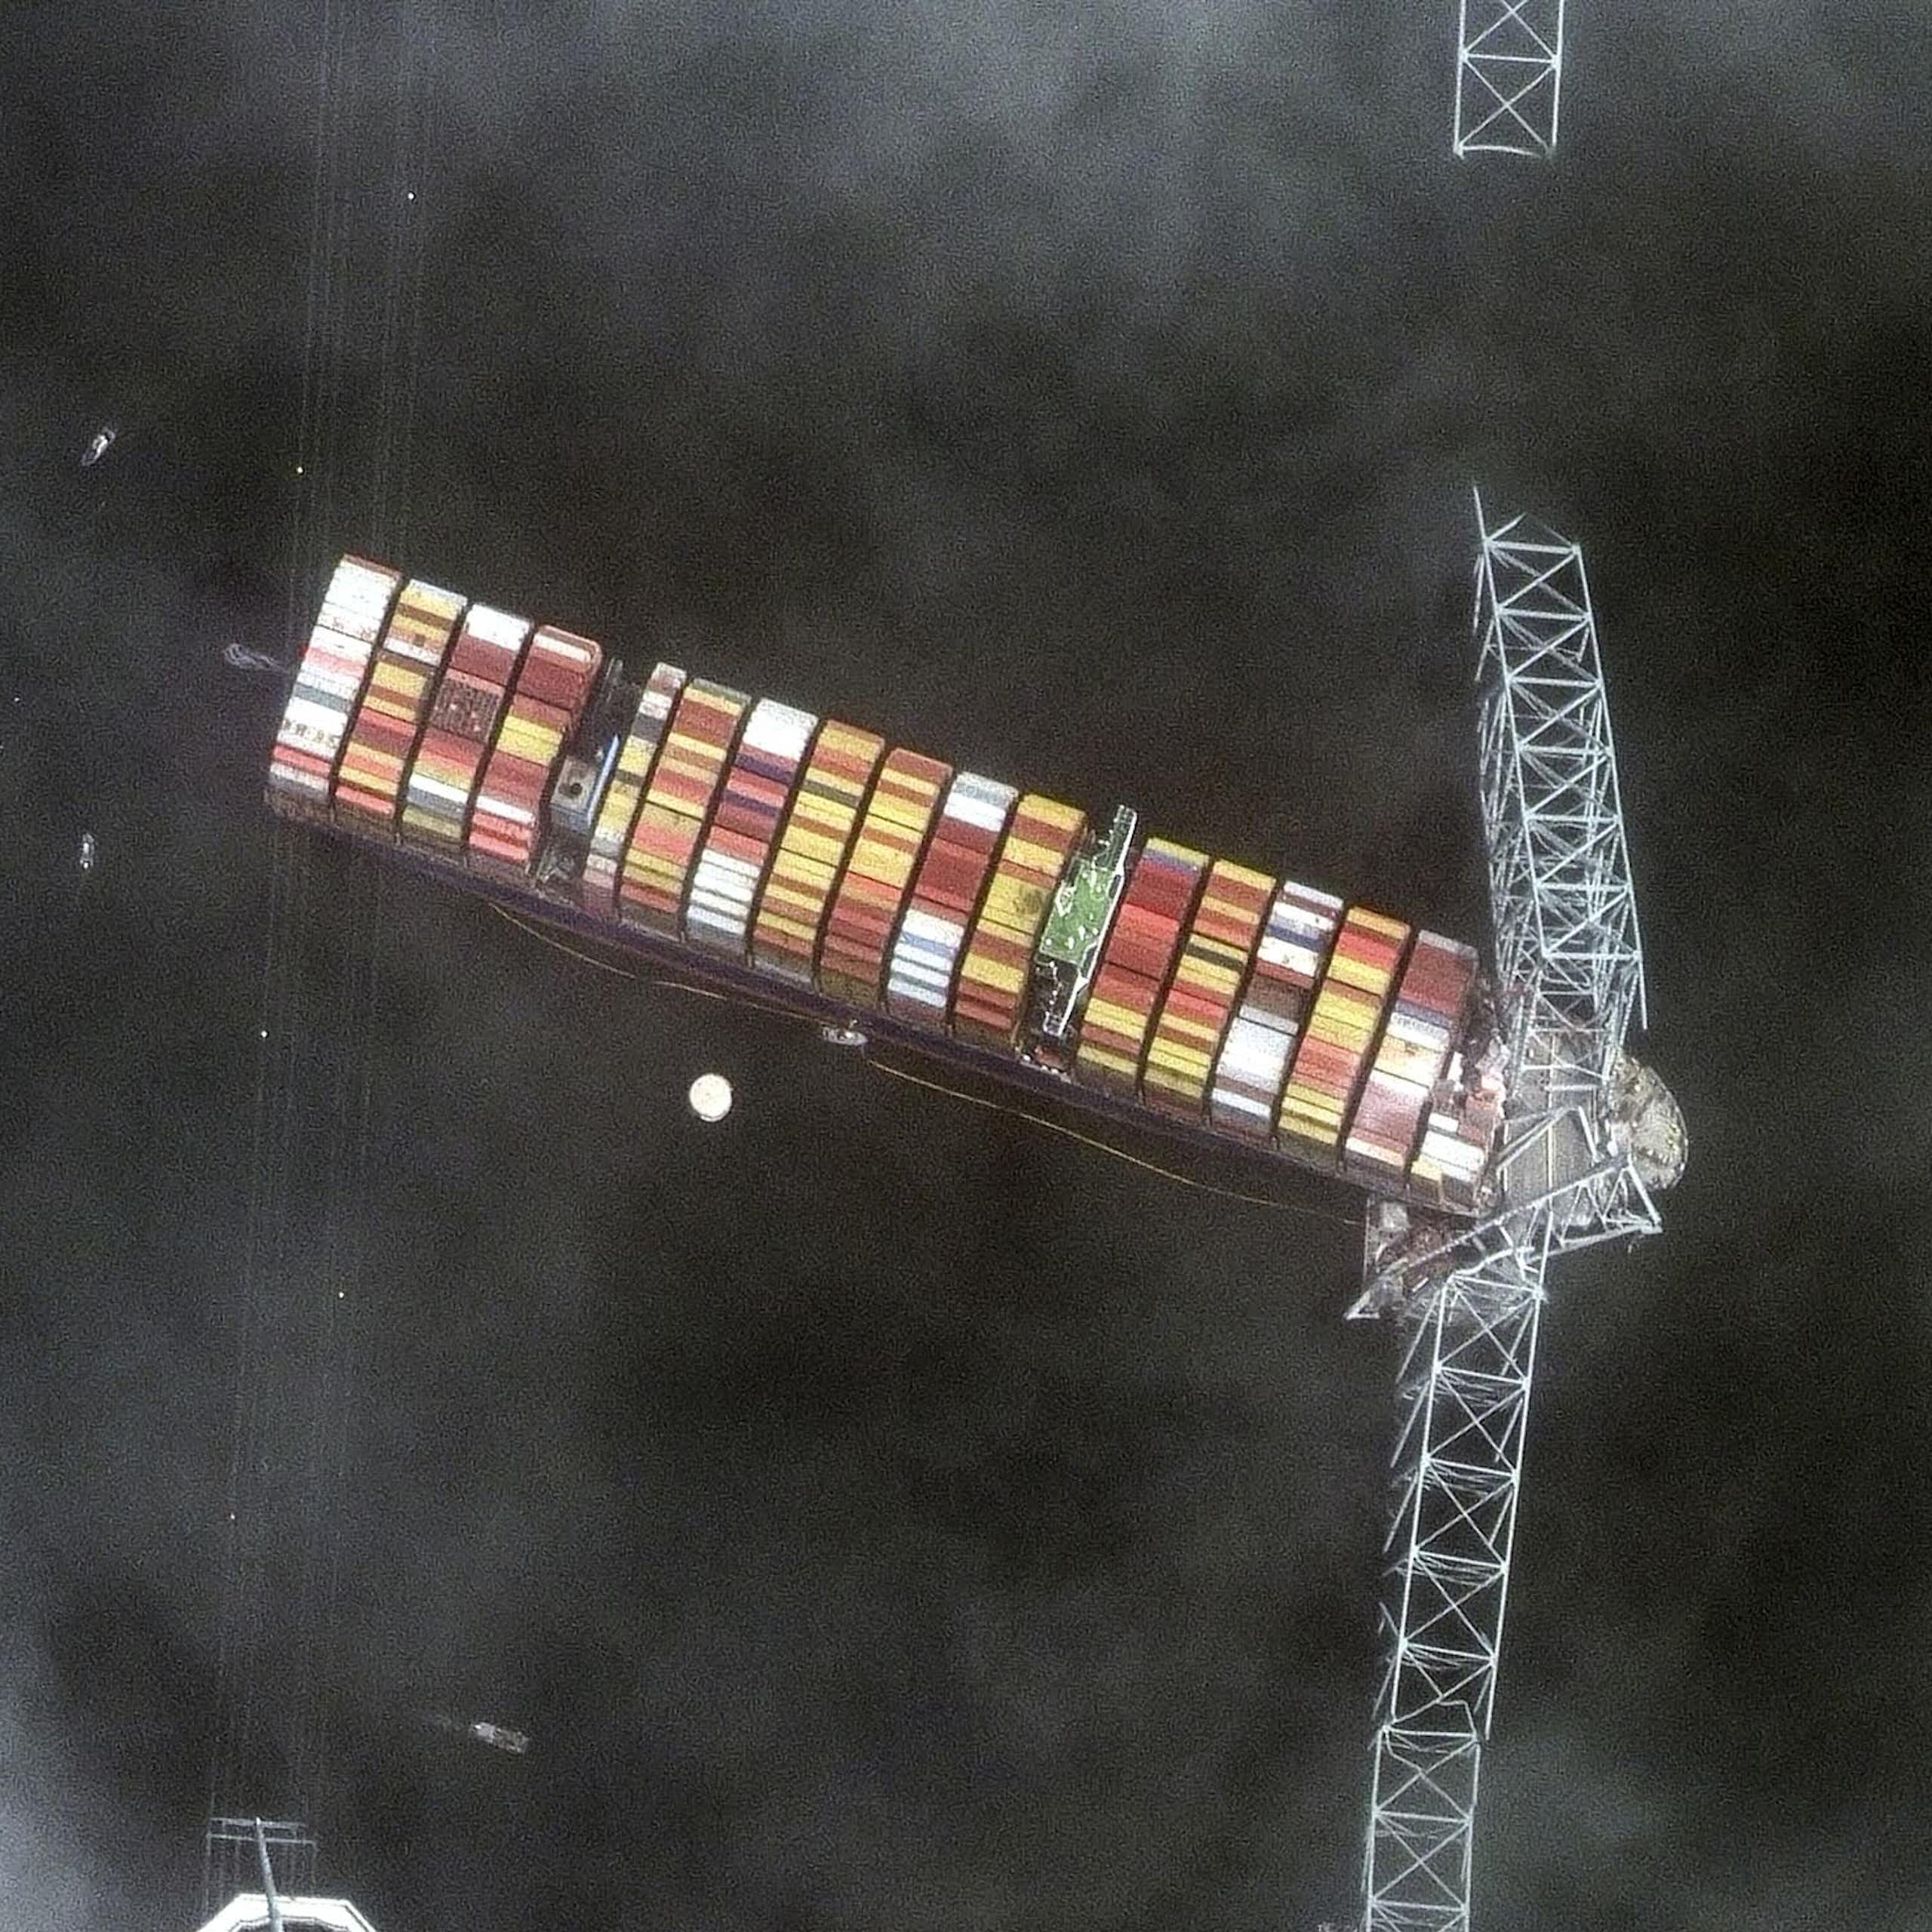 Satellite photo showing a container ship entangled with the wreckage of a bridge.